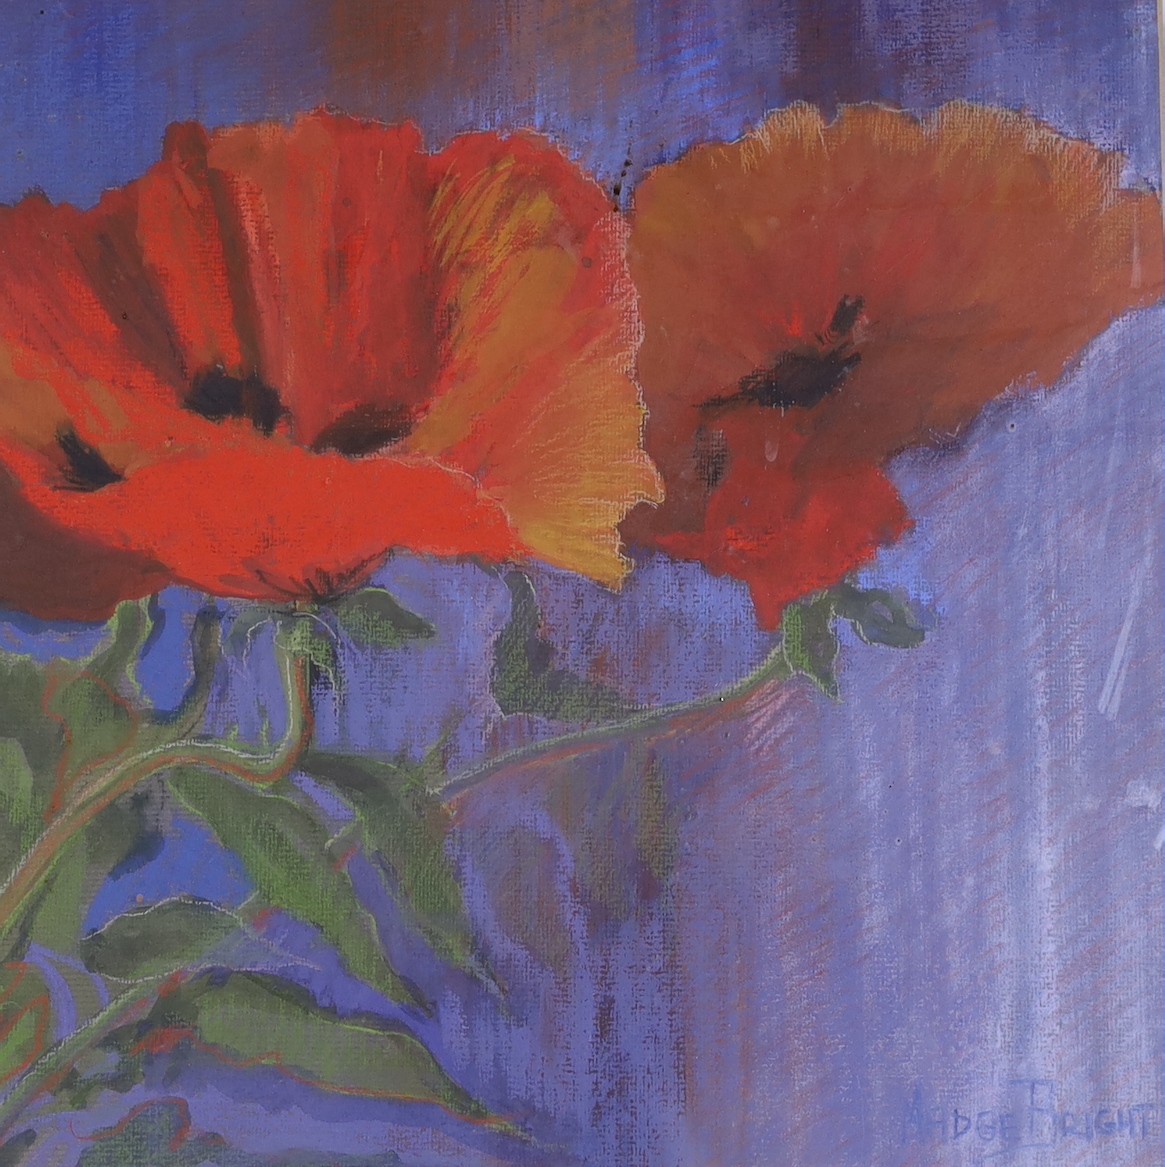 Madge Bright, two pastels, Studies of poppies, signed, 28 x 28cm and 26 x 26cm